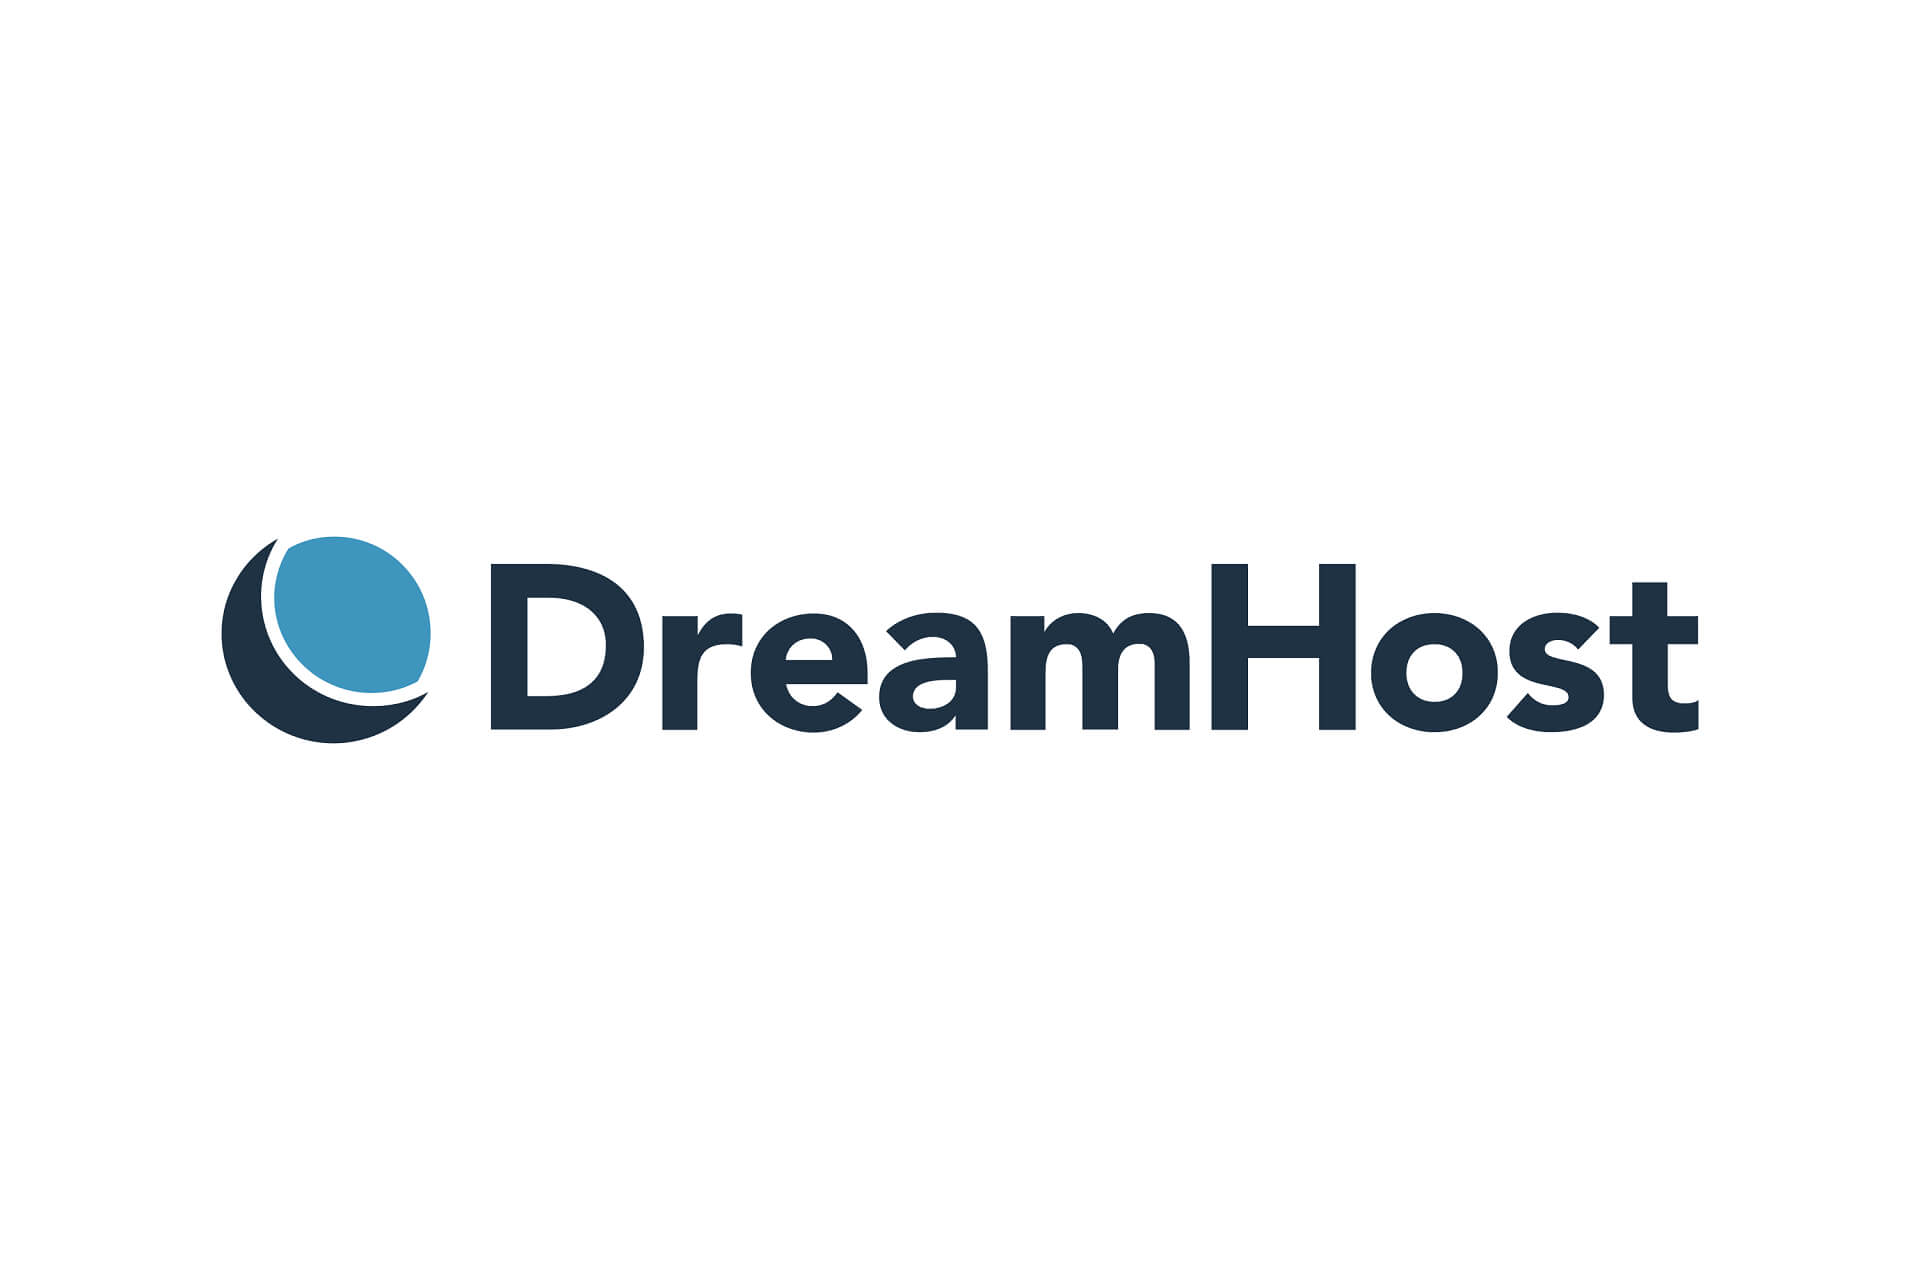 Which Dreamhost Plan Is the Most Cost-Effective - A Breakdown of Pricing and Features